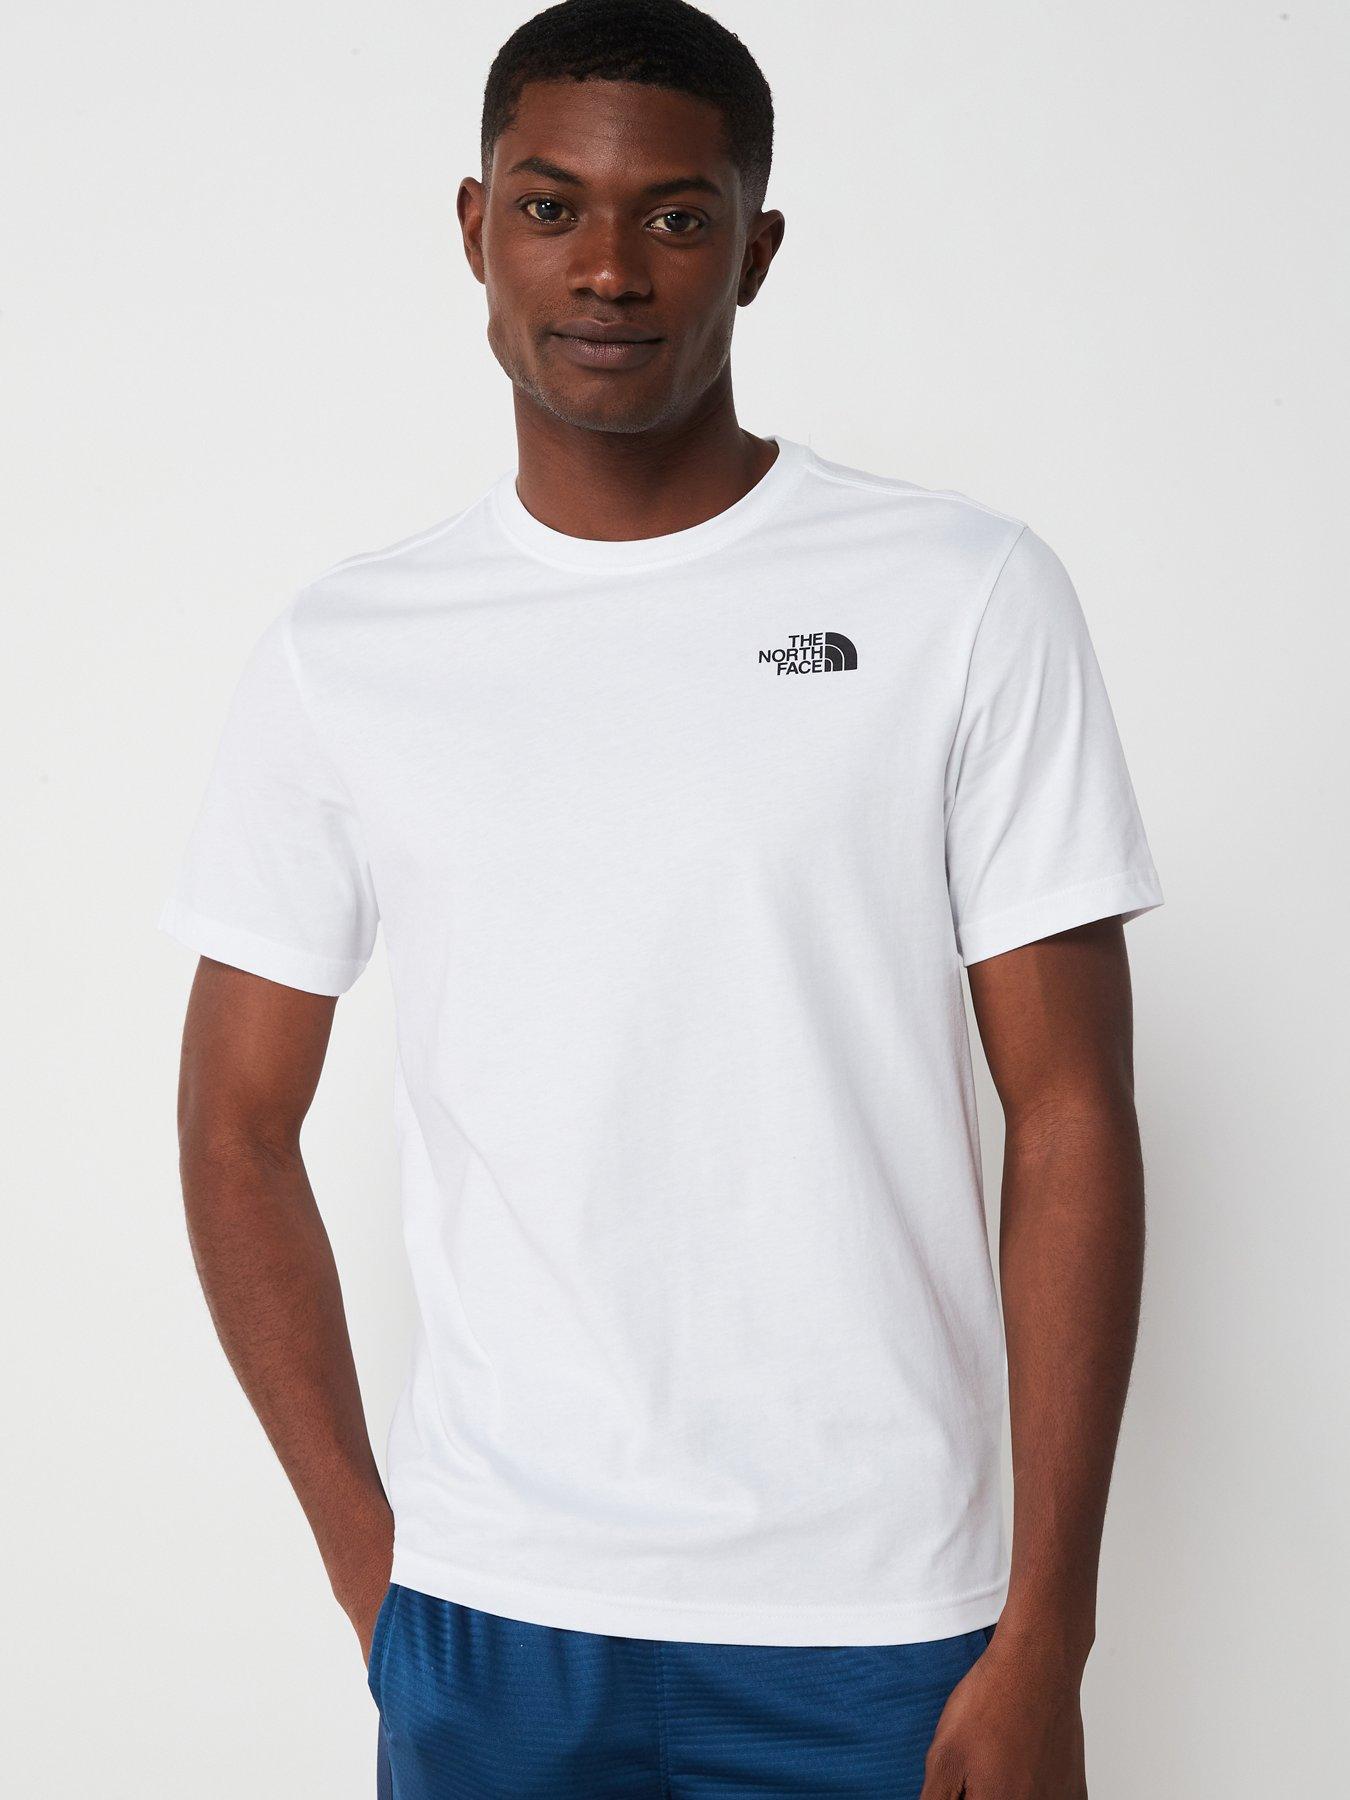 The North Face Mountain Outline t-shirt in black